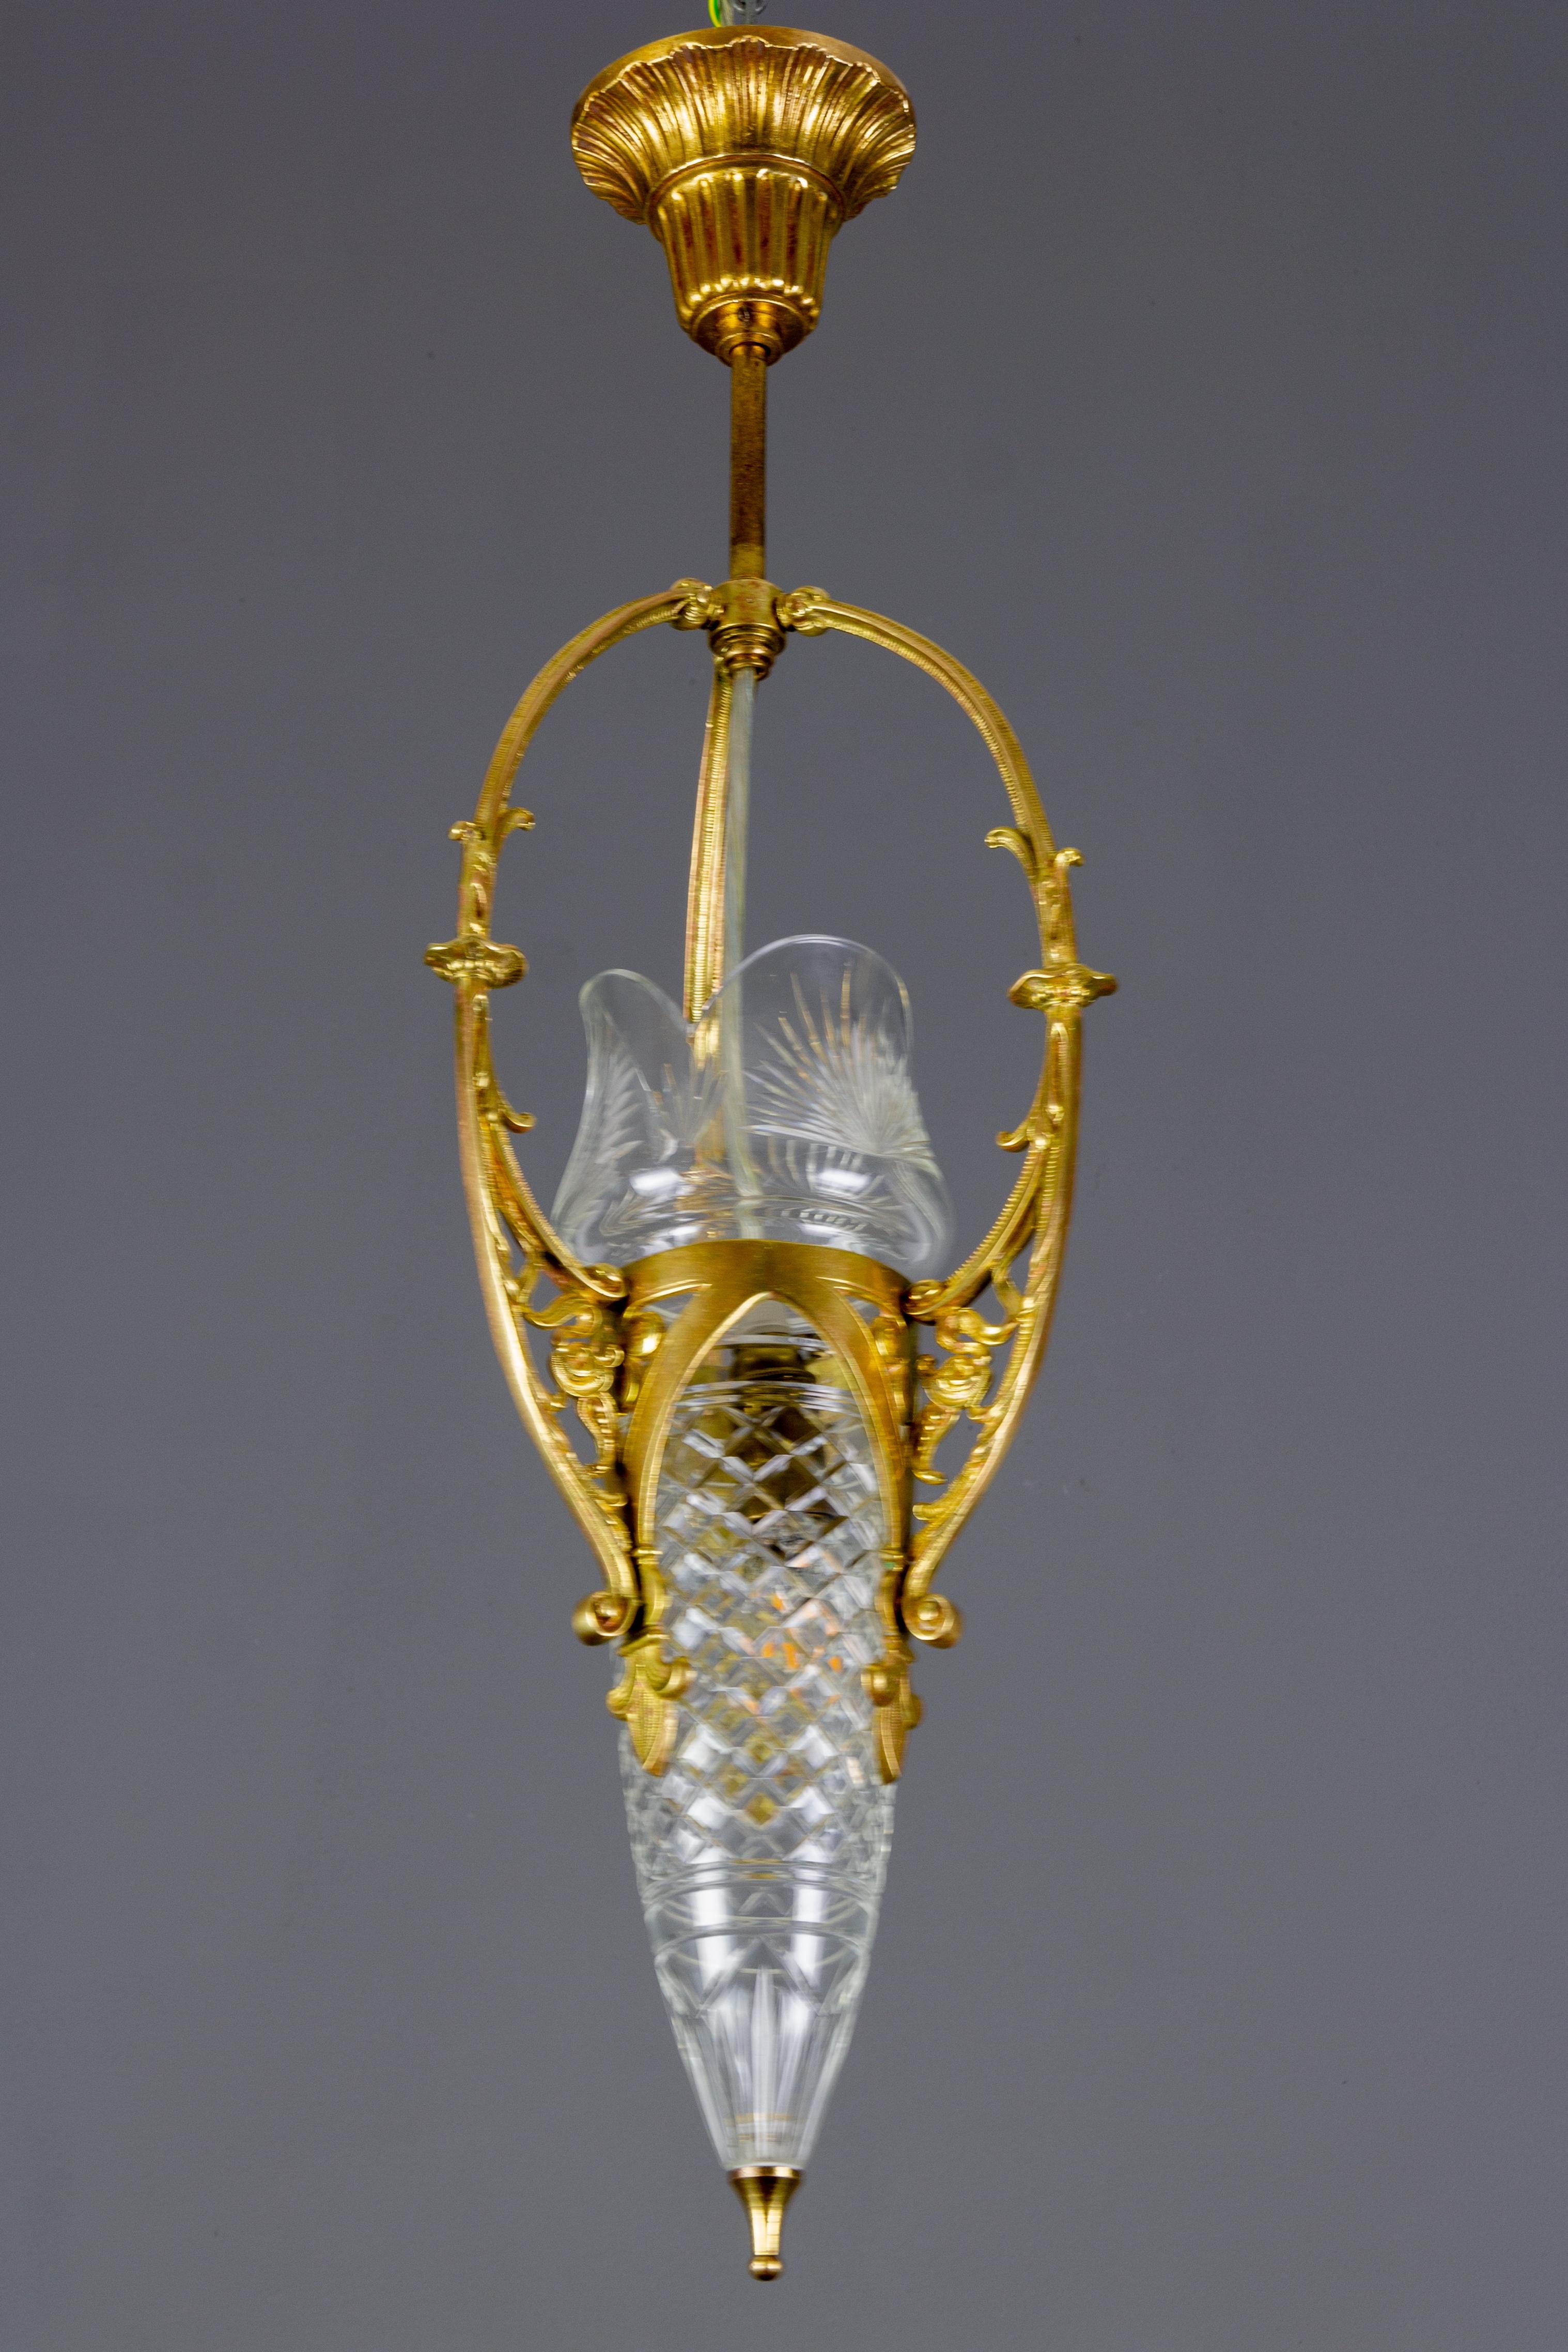 French Art Nouveau pendant light fixture with beautifully shaped brass frame and cut crystal glass lampshade.
One socket for the E14 size light bulb.
Dimensions: Height 65 cm / 25.6 in, diameter 16 cm / 6.3 in.